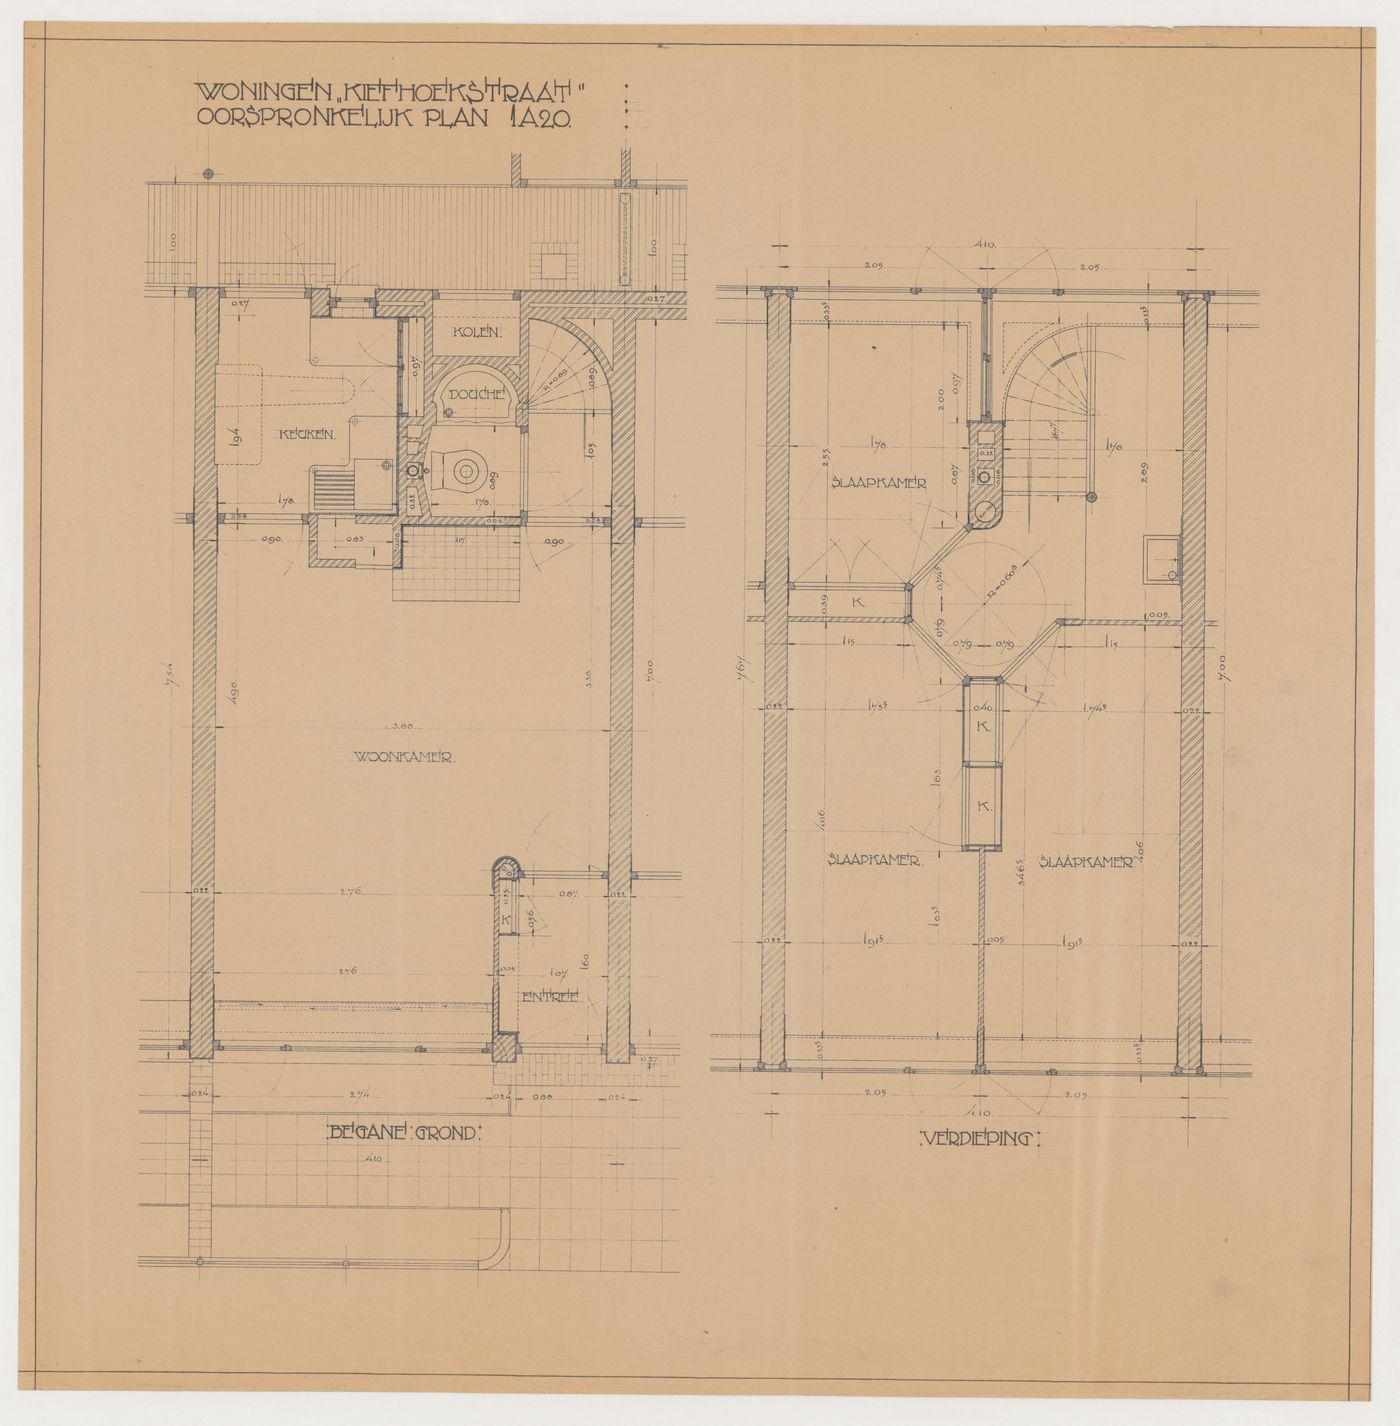 Ground and first floor plans for a housing unit for Kiefhoek Housing Estate, Rotterdam, Netherlands